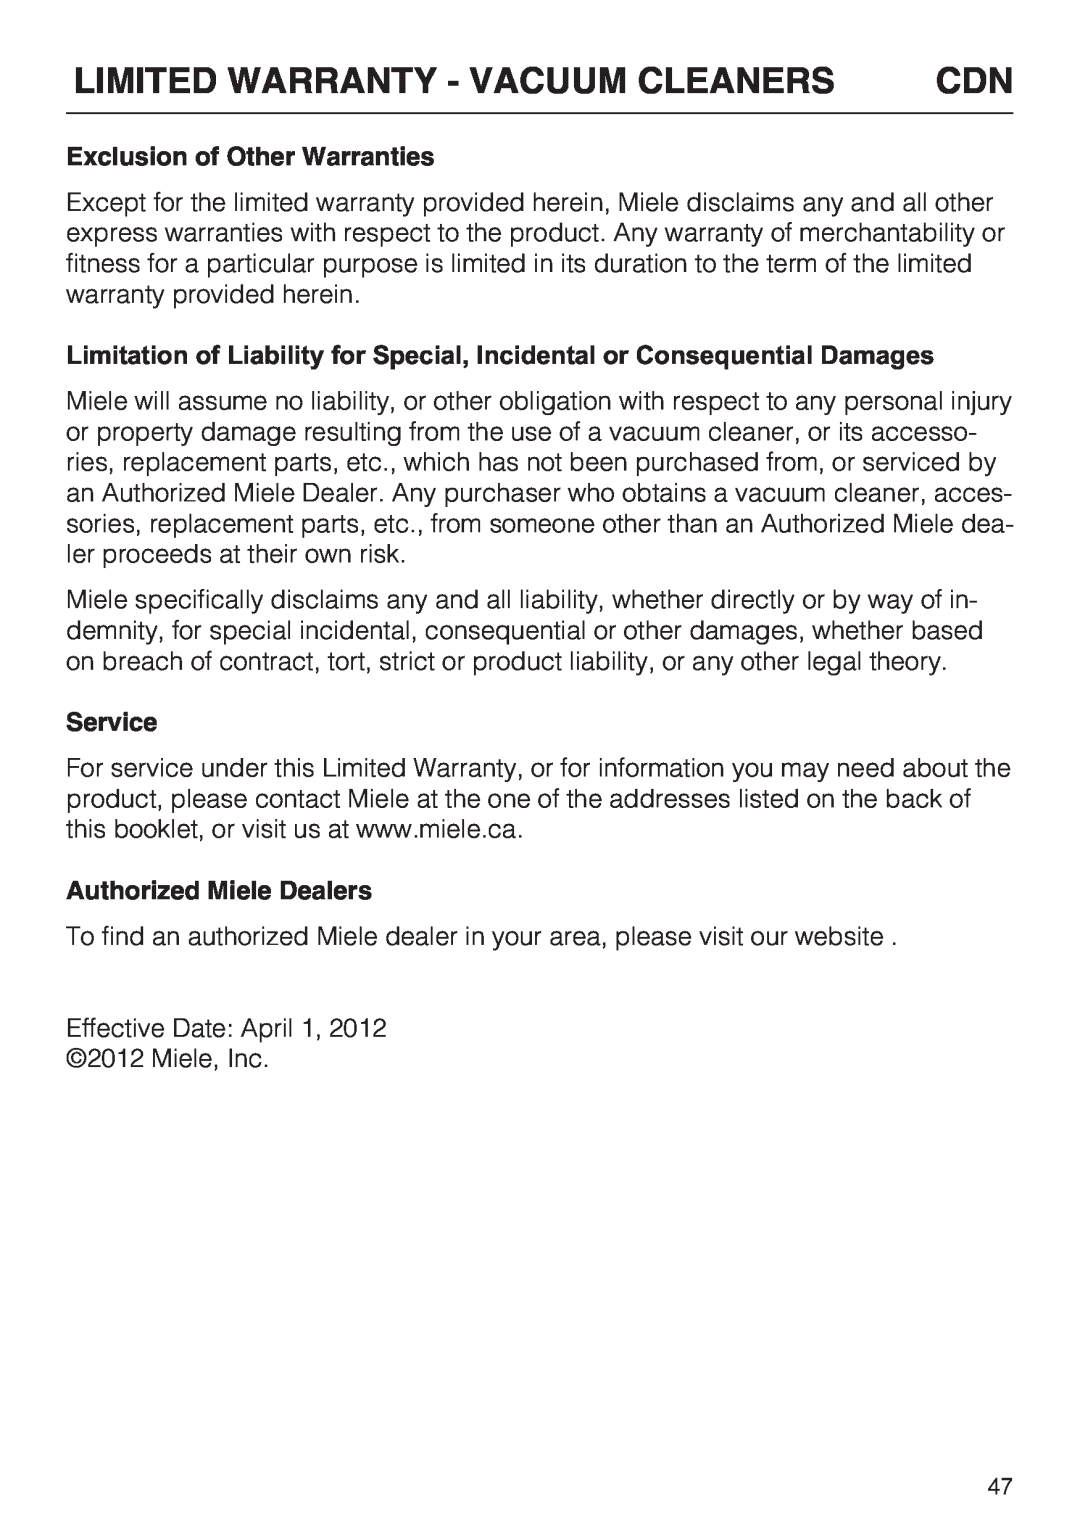 Miele S 8900 manual Limited Warranty - Vacuum Cleaners, Exclusion of Other Warranties, Service, Authorized Miele Dealers 